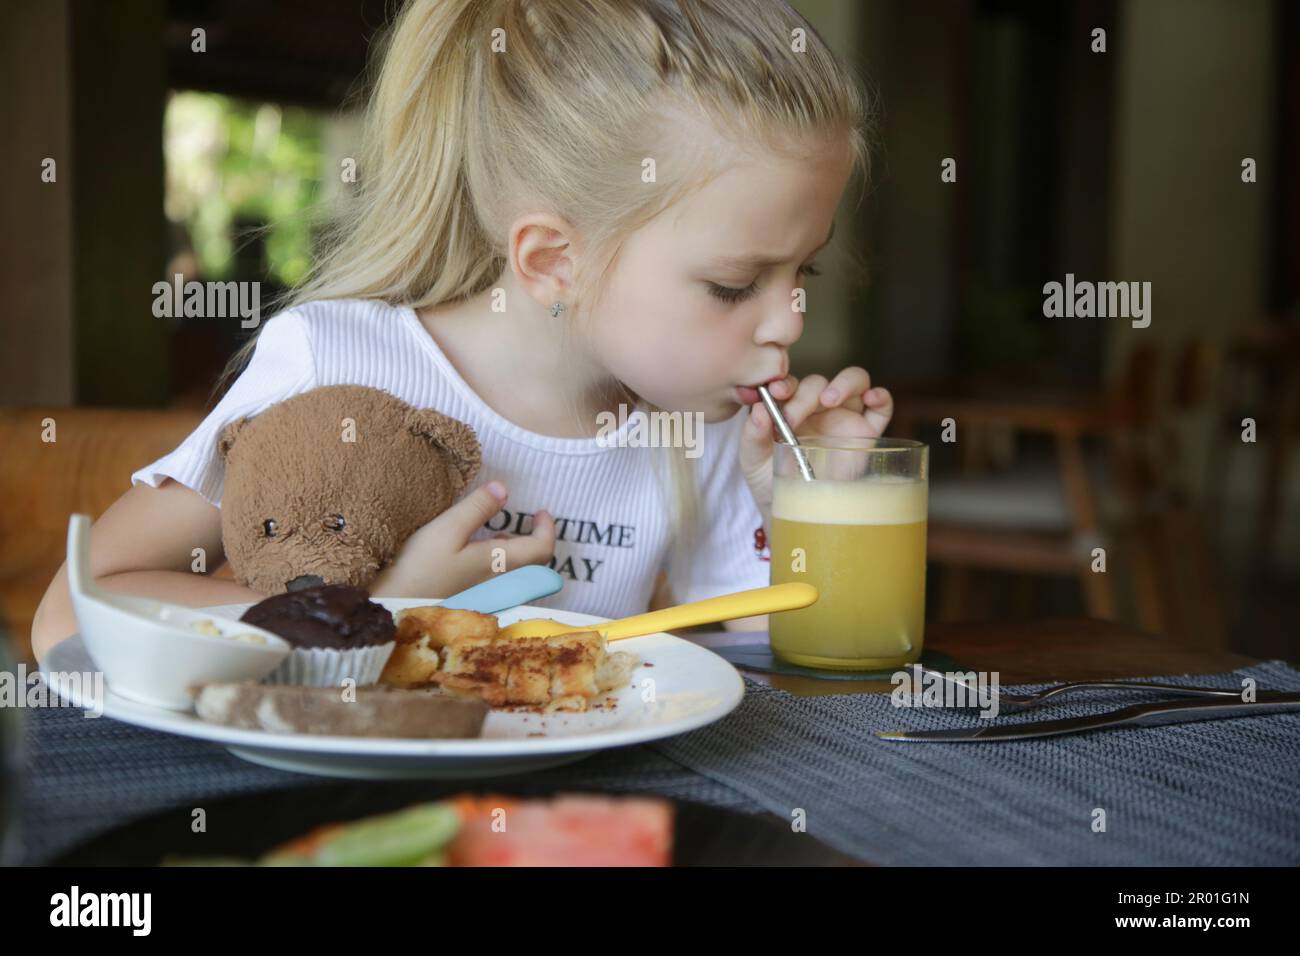 Cute 5 years old girl having kids meal at the restaurant Cute 5 years old girl having kids meal at the restaurant Stock Photo